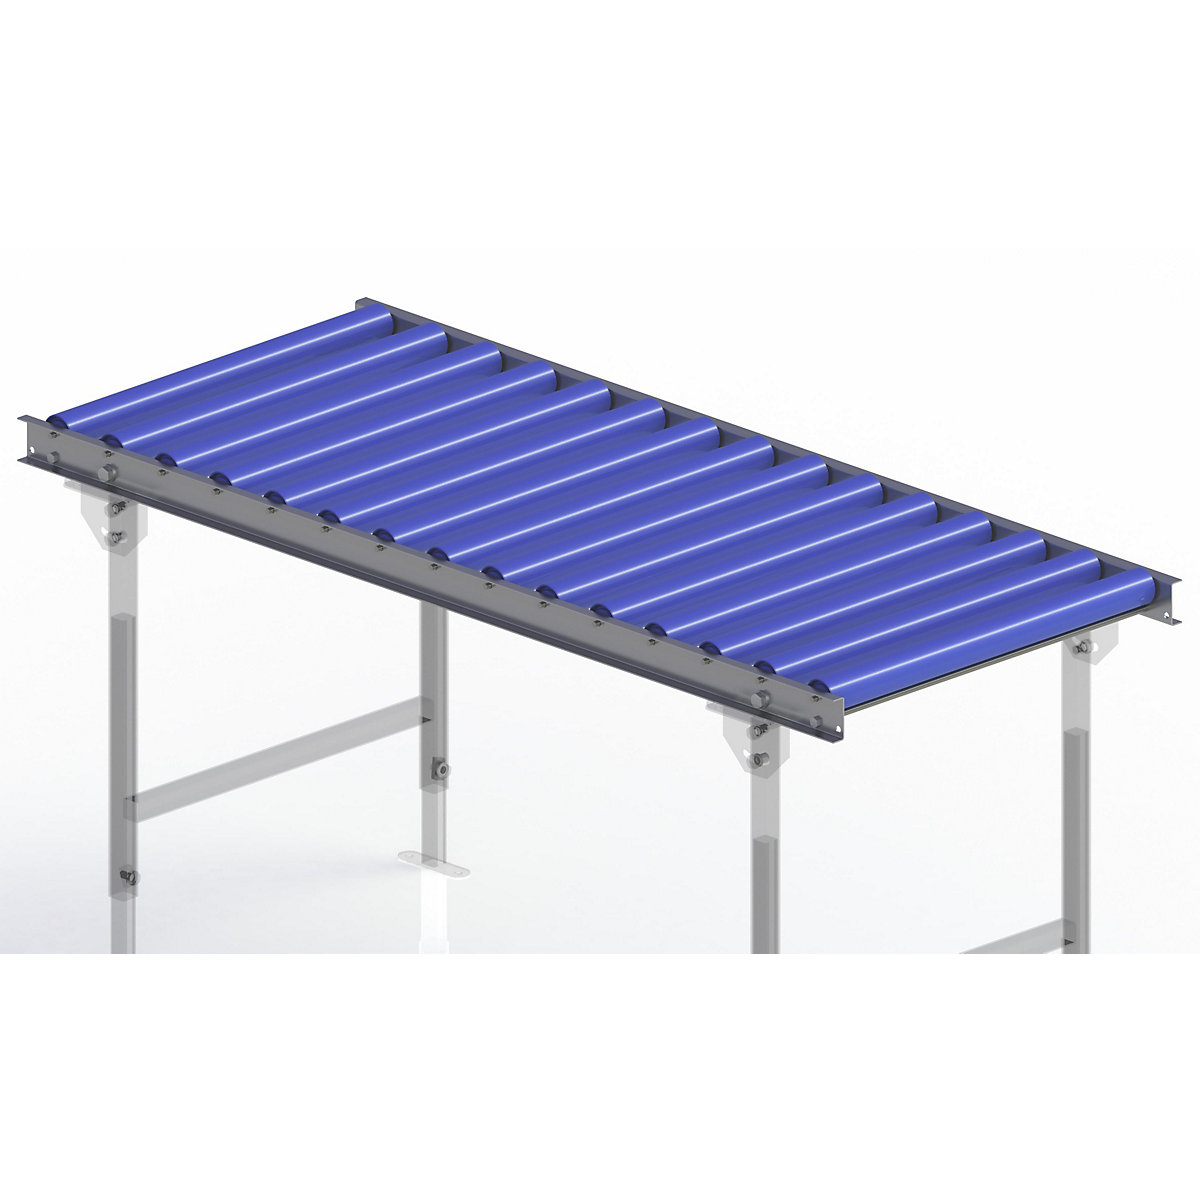 Light duty roller conveyor, steel frame with plastic rollers – Gura, track width 600 mm, axle spacing 100 mm, length 1.5 m-15